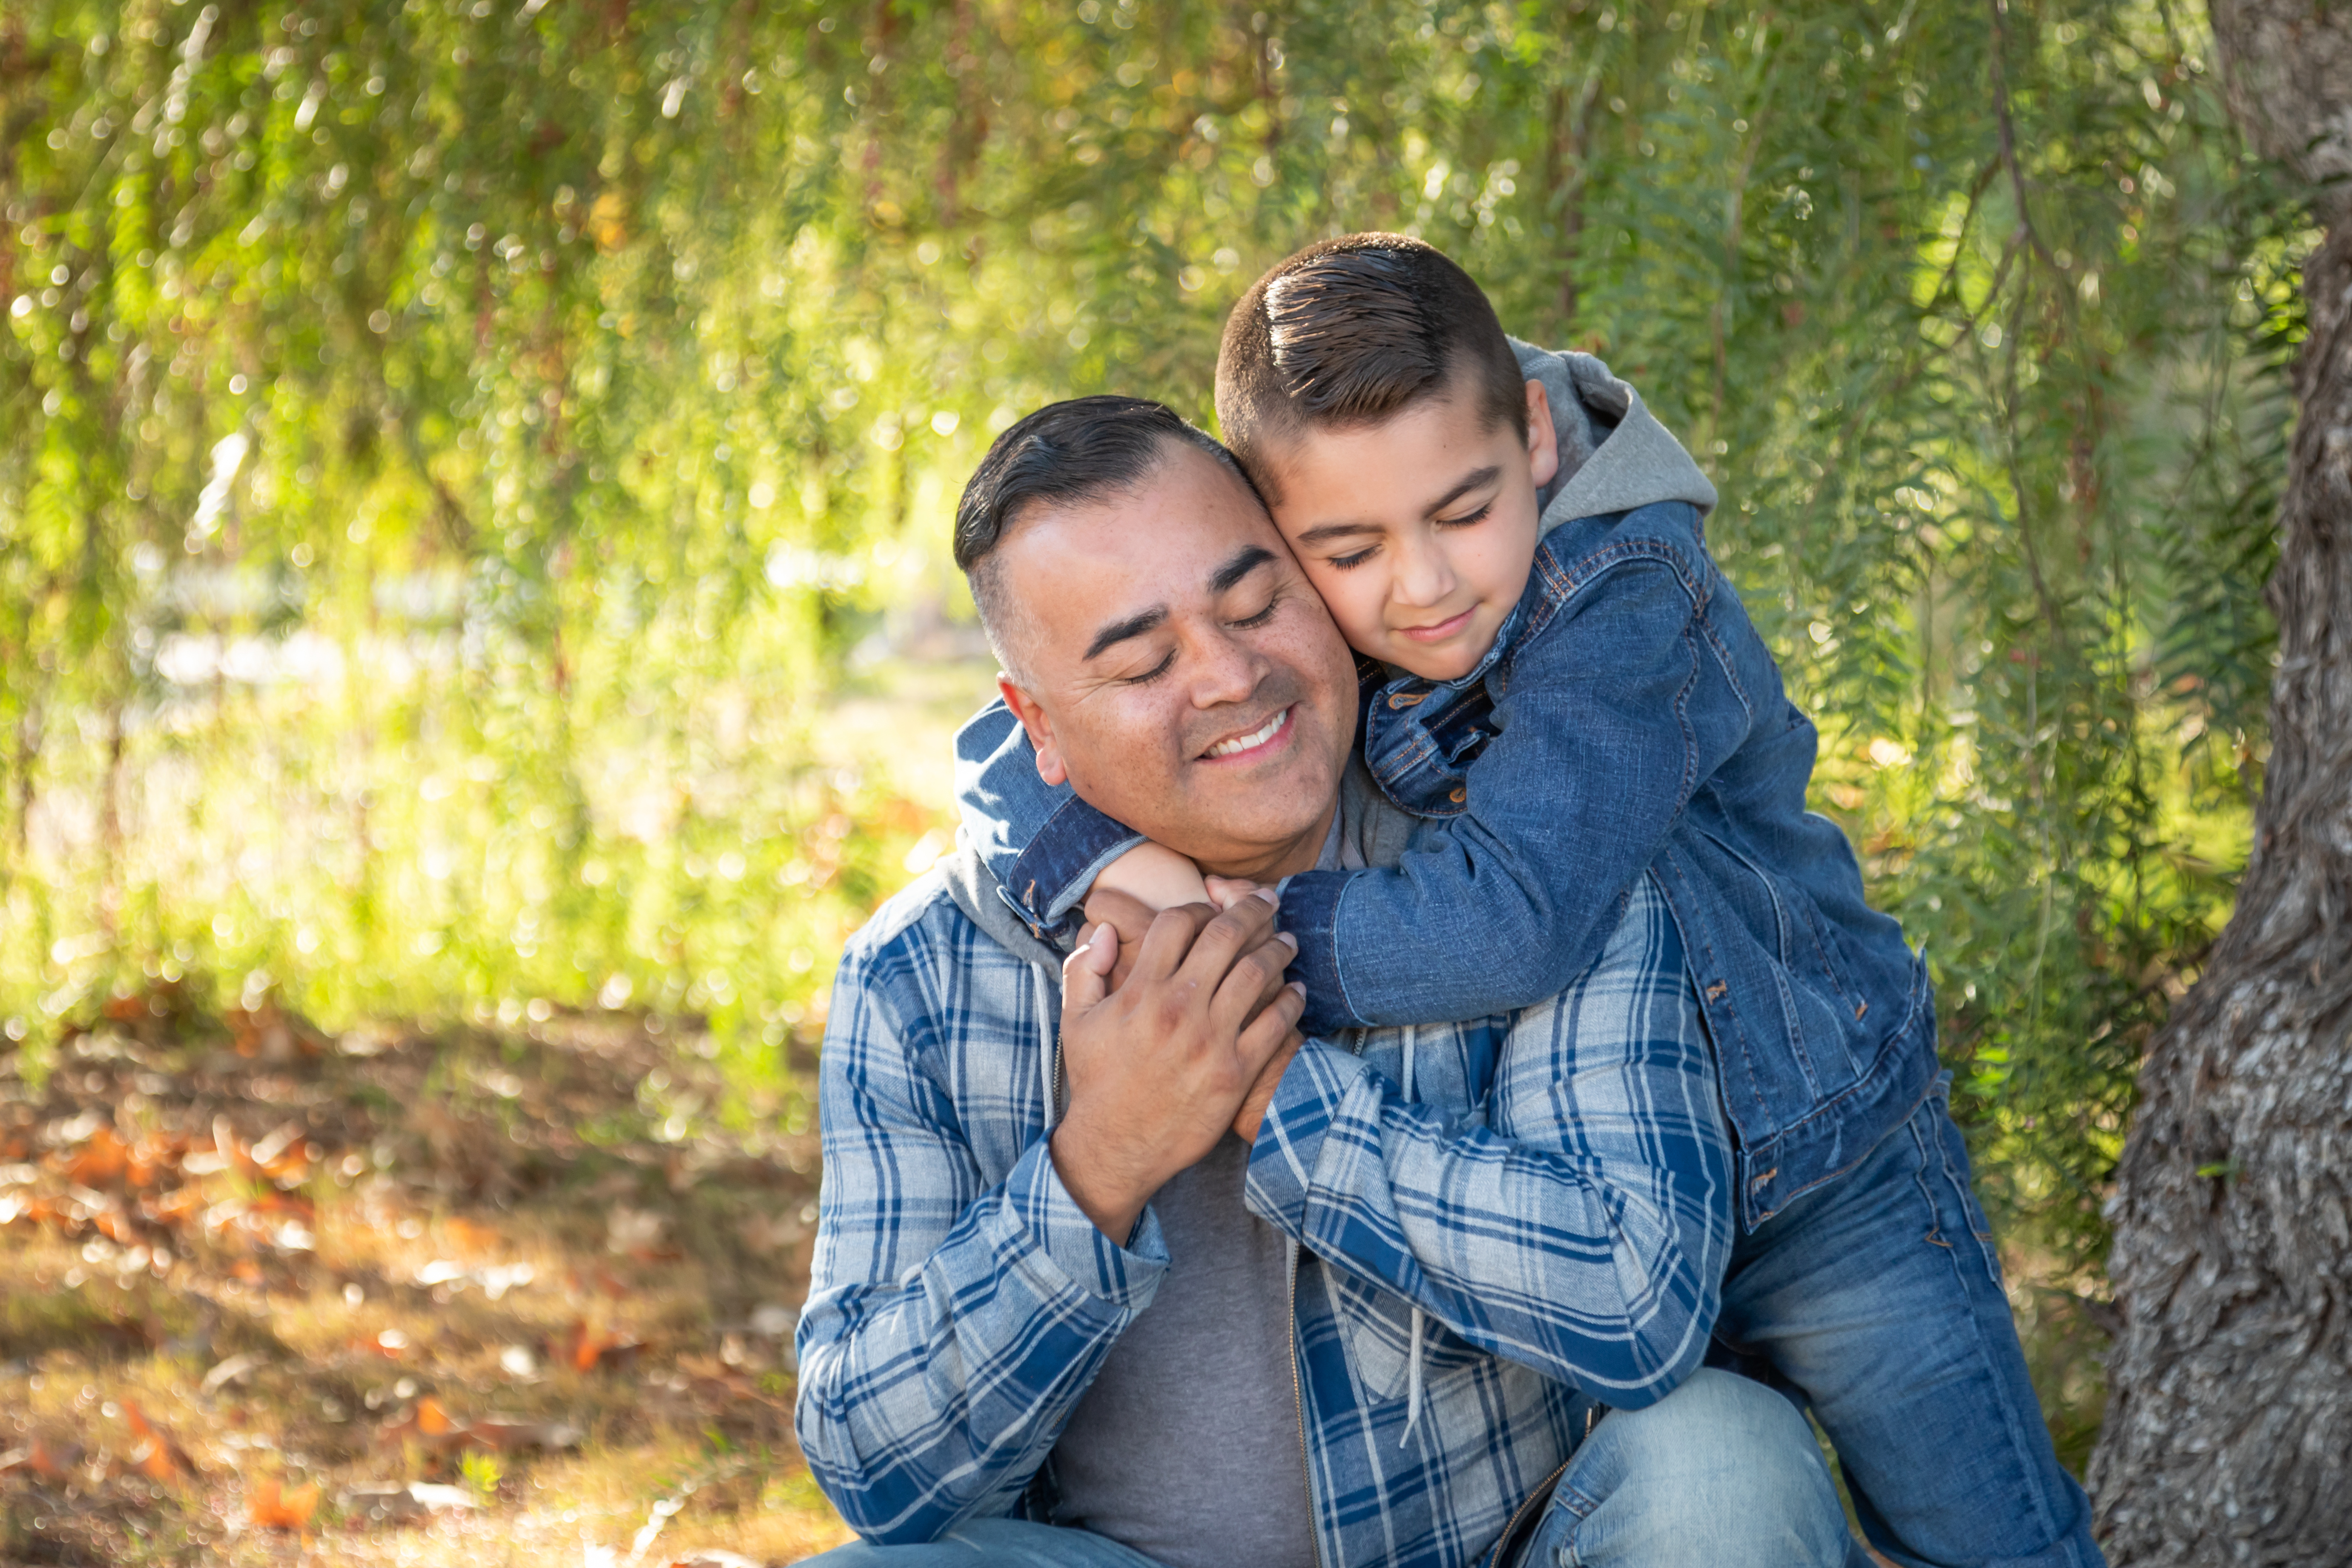 A child hugs an adult around the shoulders while standing under a tree